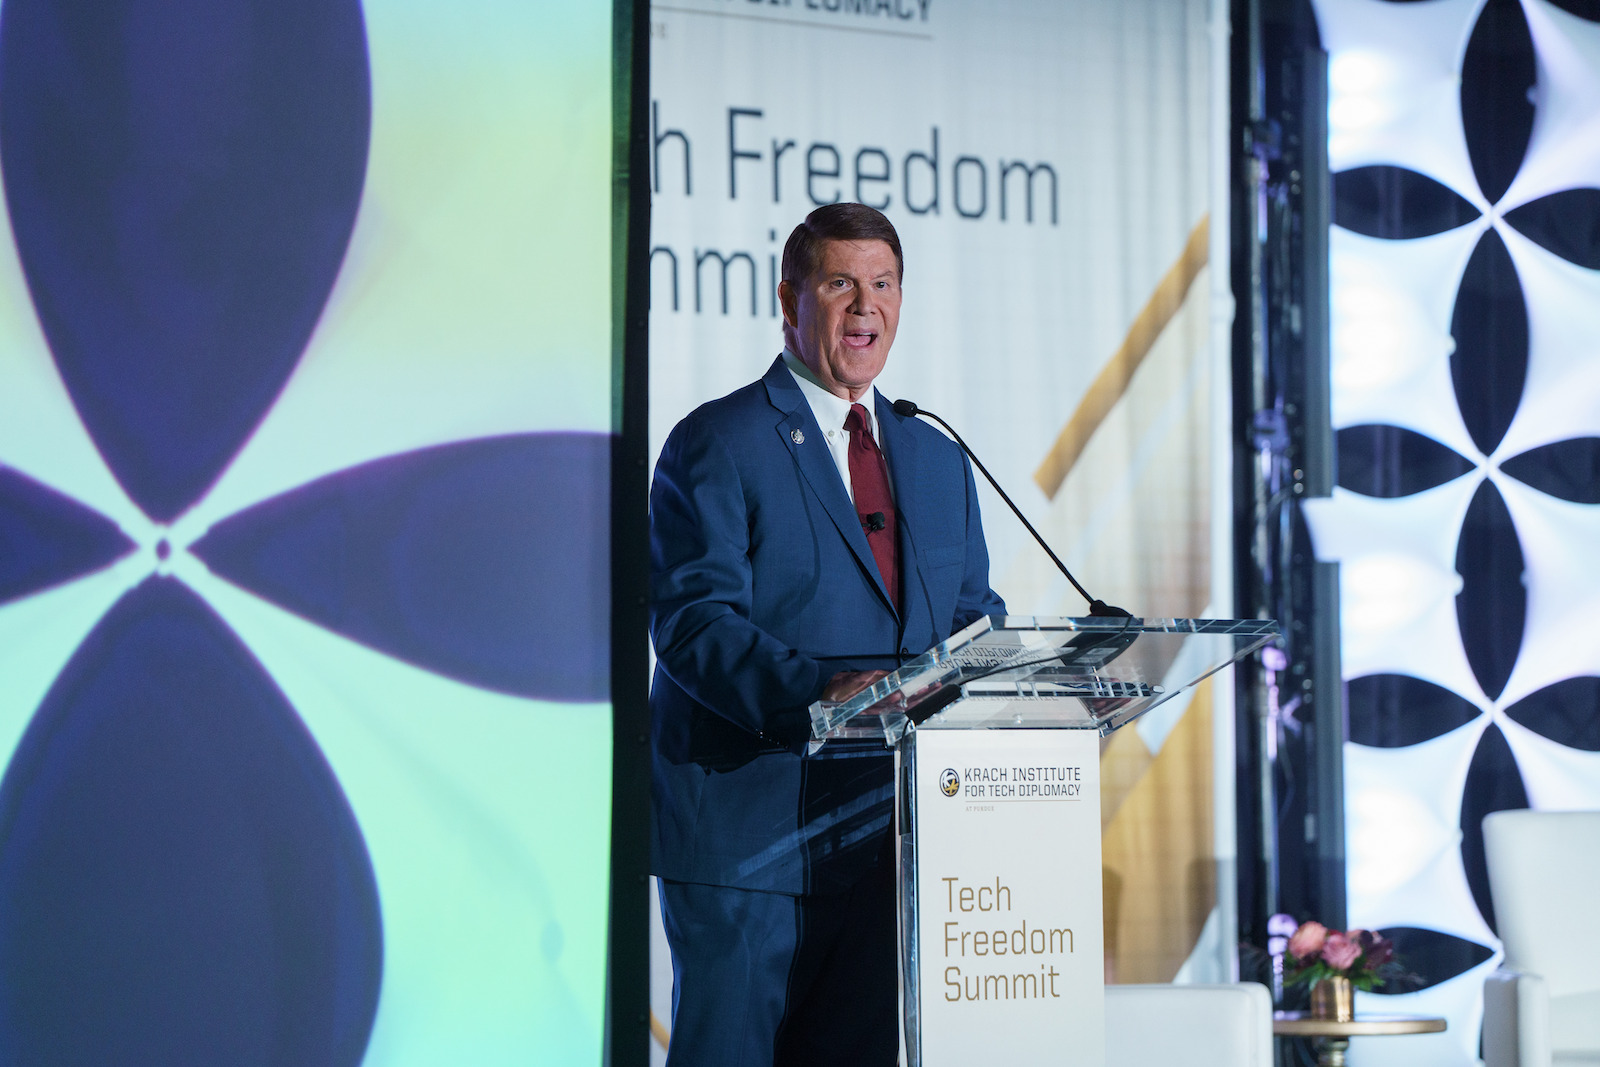 Krach Institute Chairman Keith Krach's Opening Remarks at KITDP's Tech Freedom Summit 2023